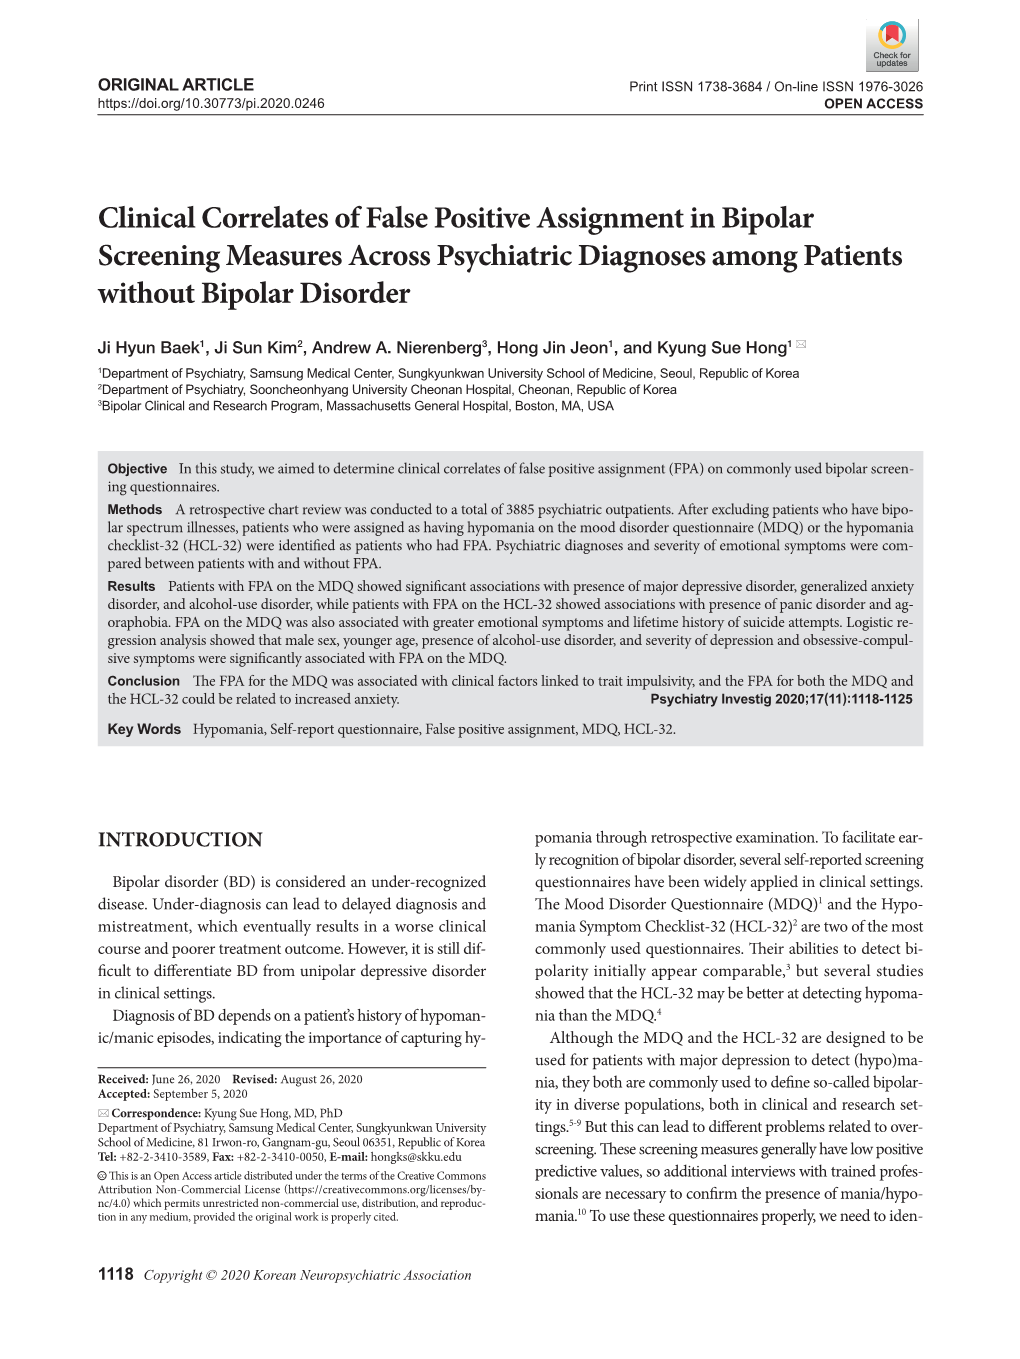 Clinical Correlates of False Positive Assignment in Bipolar Screening Measures Across Psychiatric Diagnoses Among Patients Without Bipolar Disorder